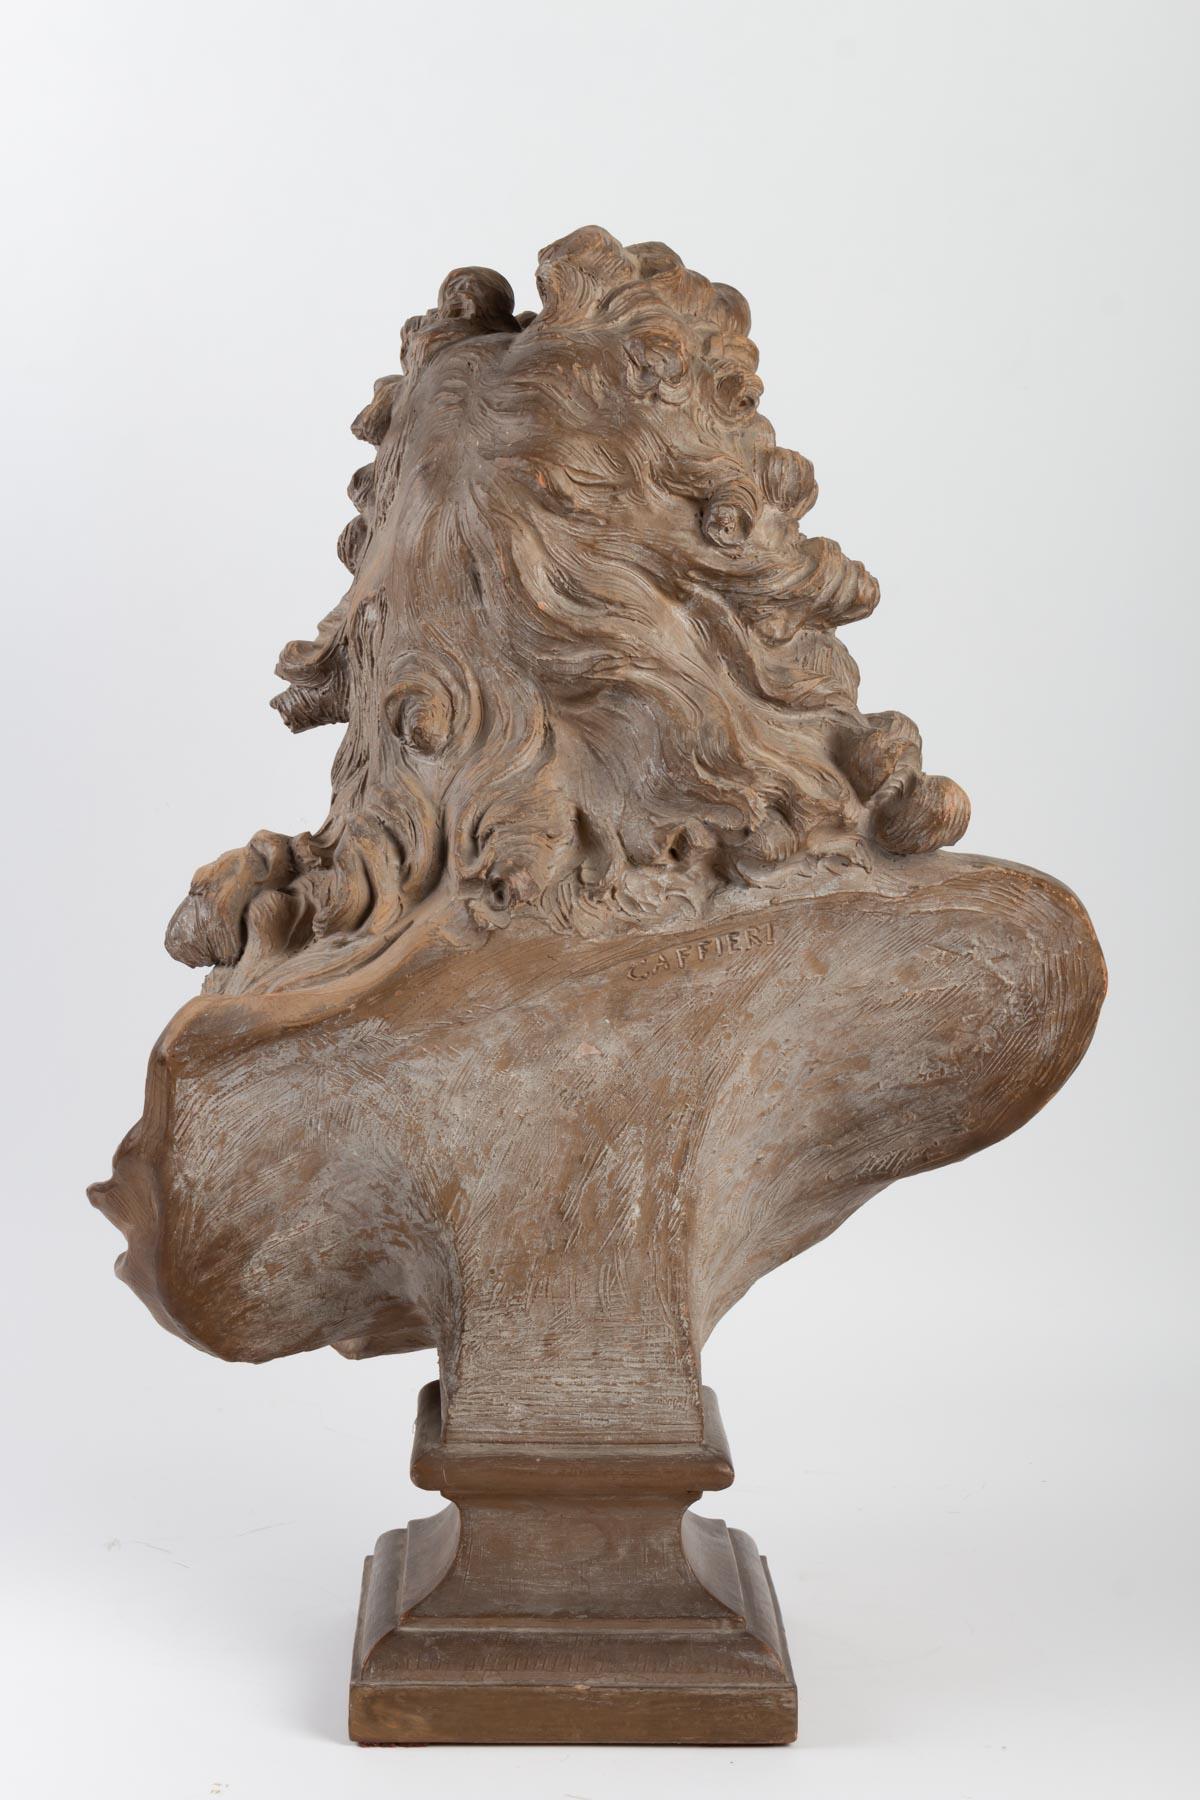 18th Century Terracotta Sculpture by Voltaire, Signed Caffieri